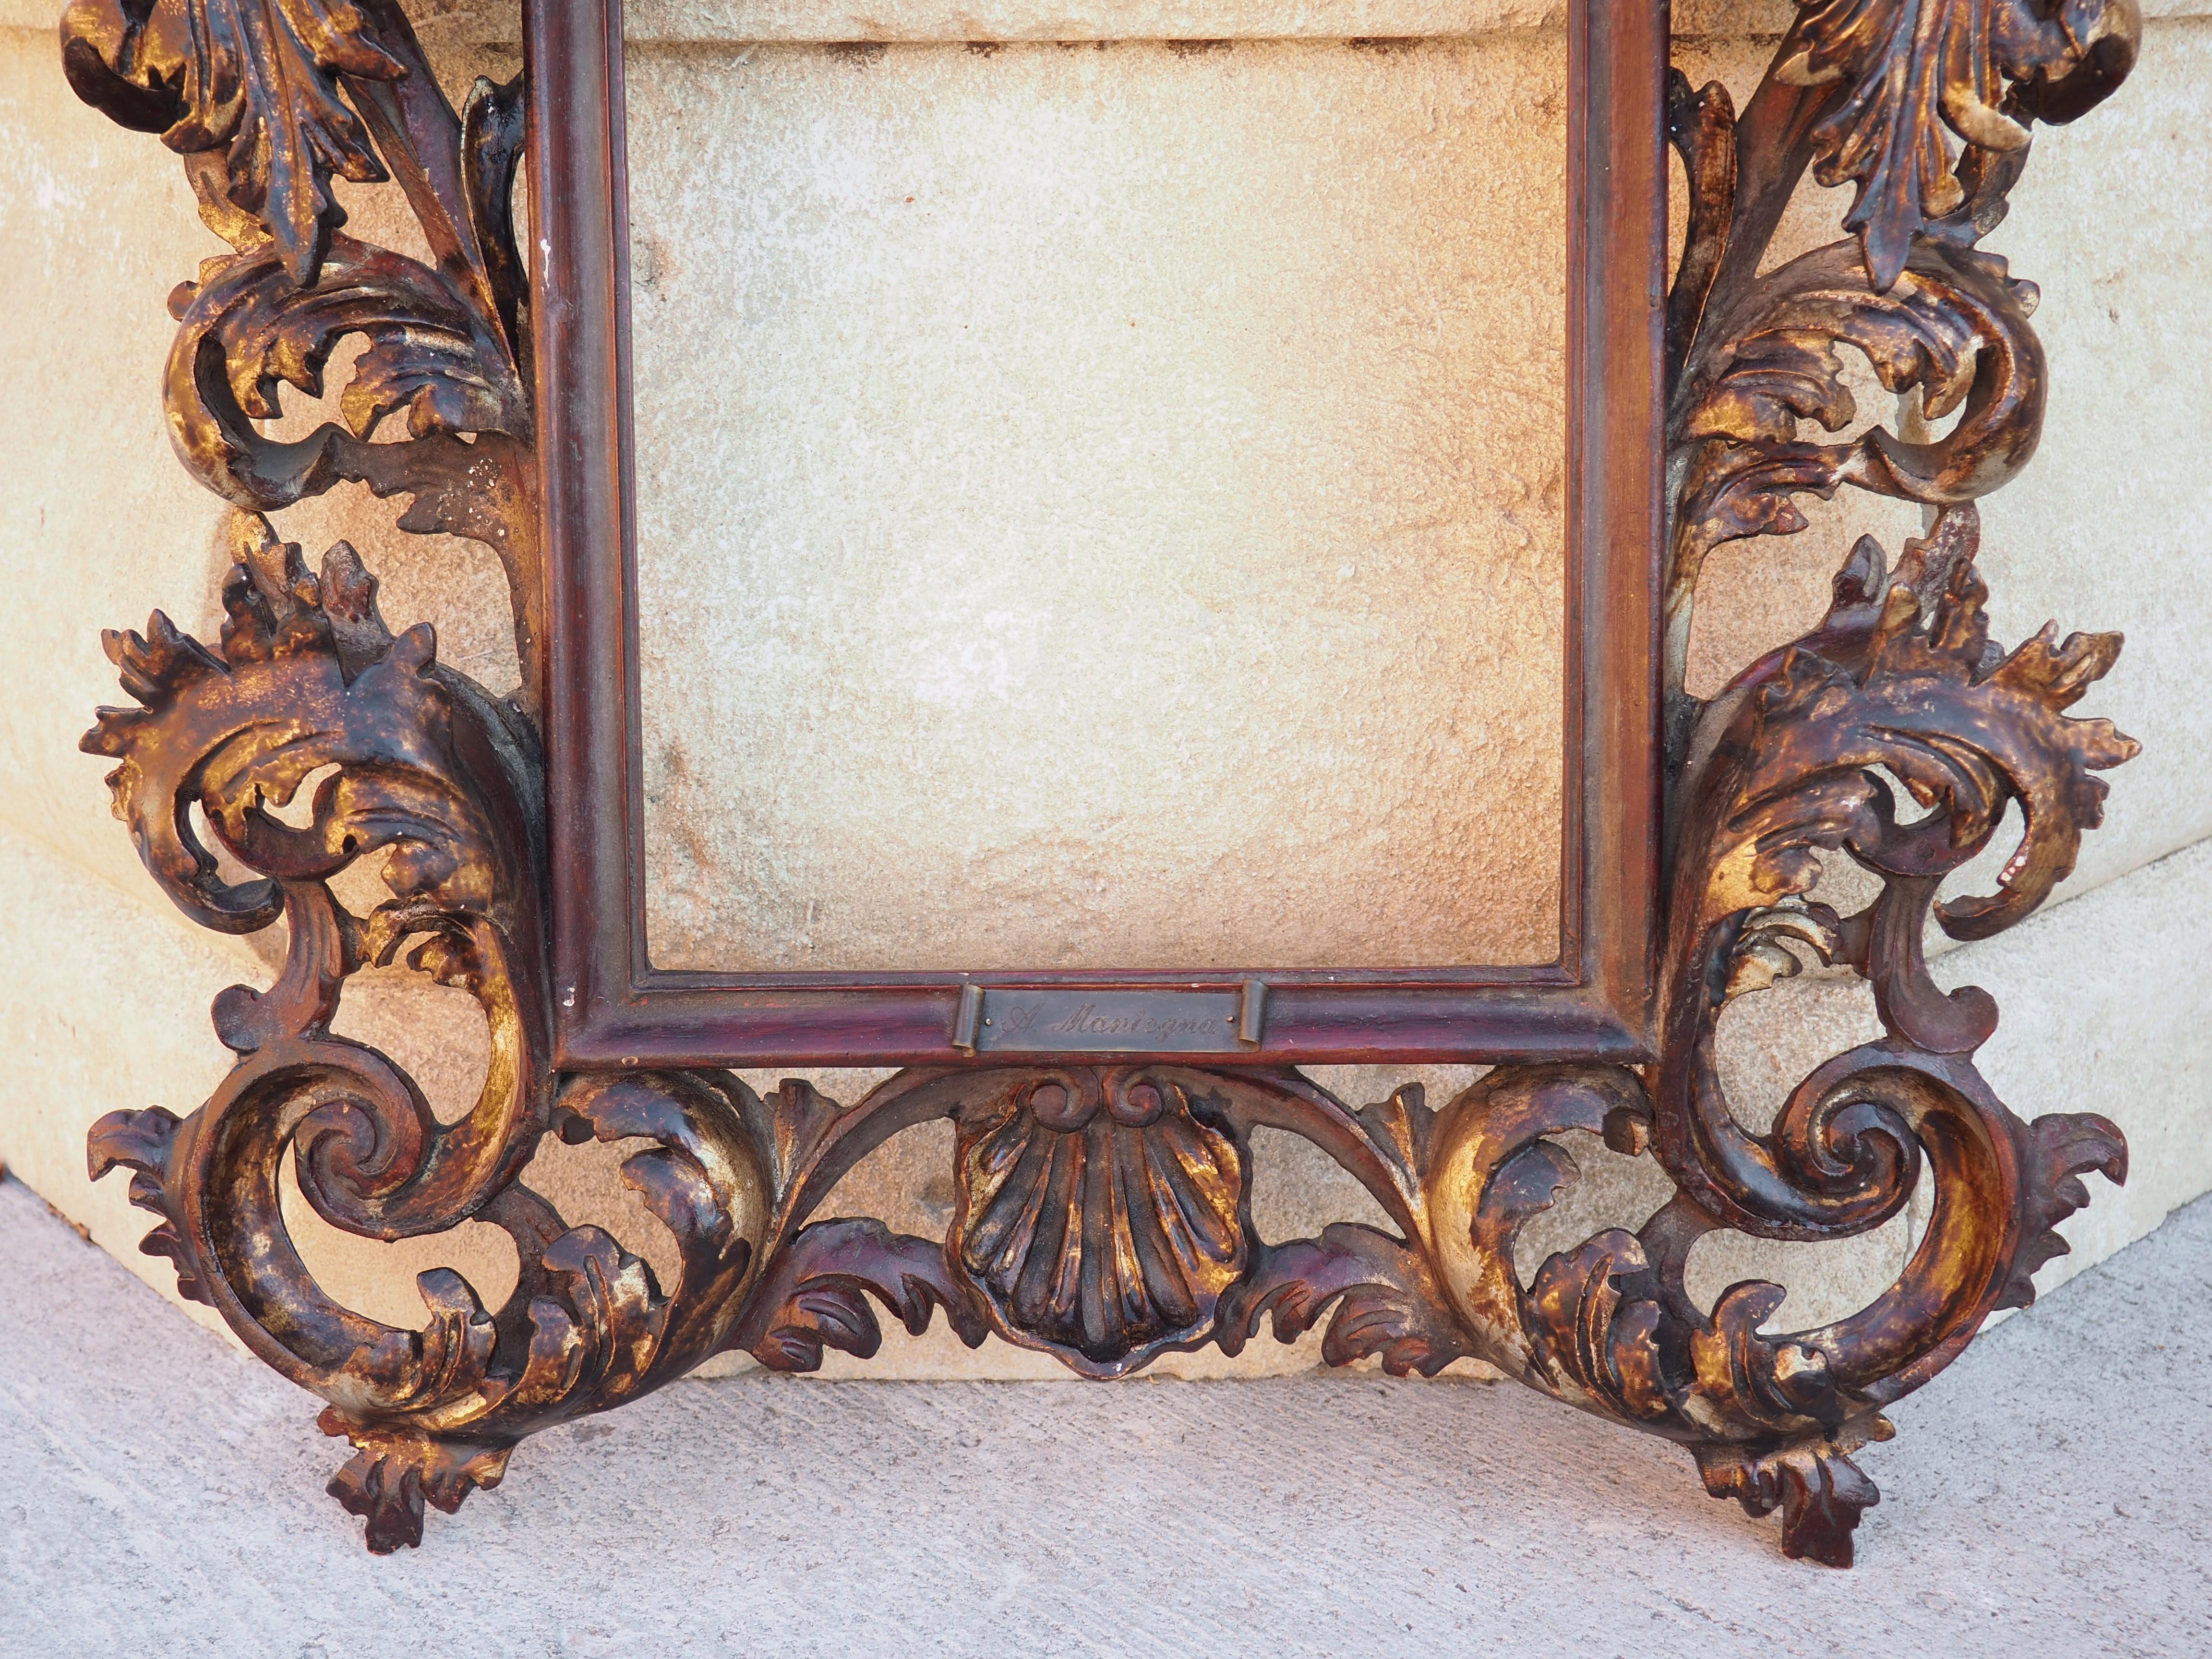 This polychromed frame was hand-carved in Florence, Italy, in the 1800’s. Intricate carvings gracing all four sides is typical of frames made in this part of Italy from the 1600s to late 1800’s.

Both sides are adorned with airy and graceful foliate